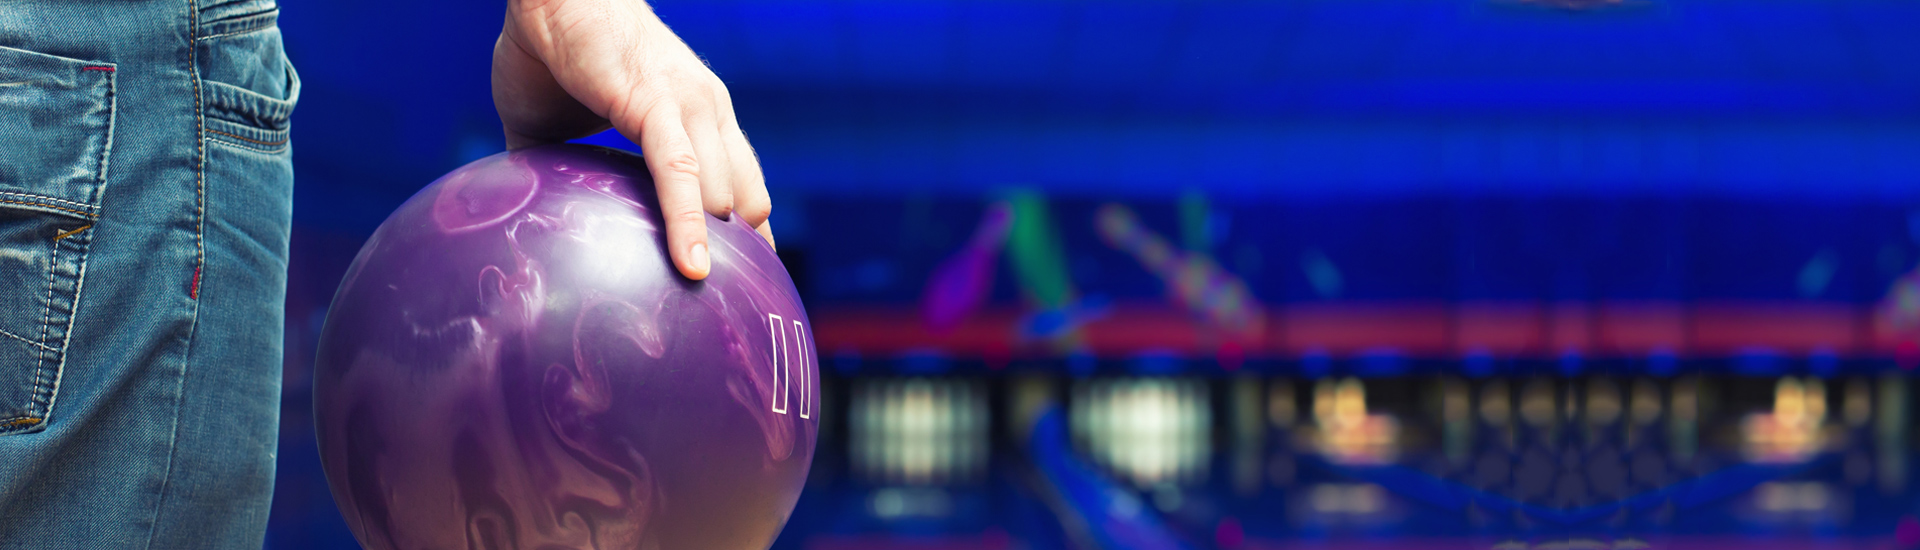 Man Holding Ball Against Bowling Alley